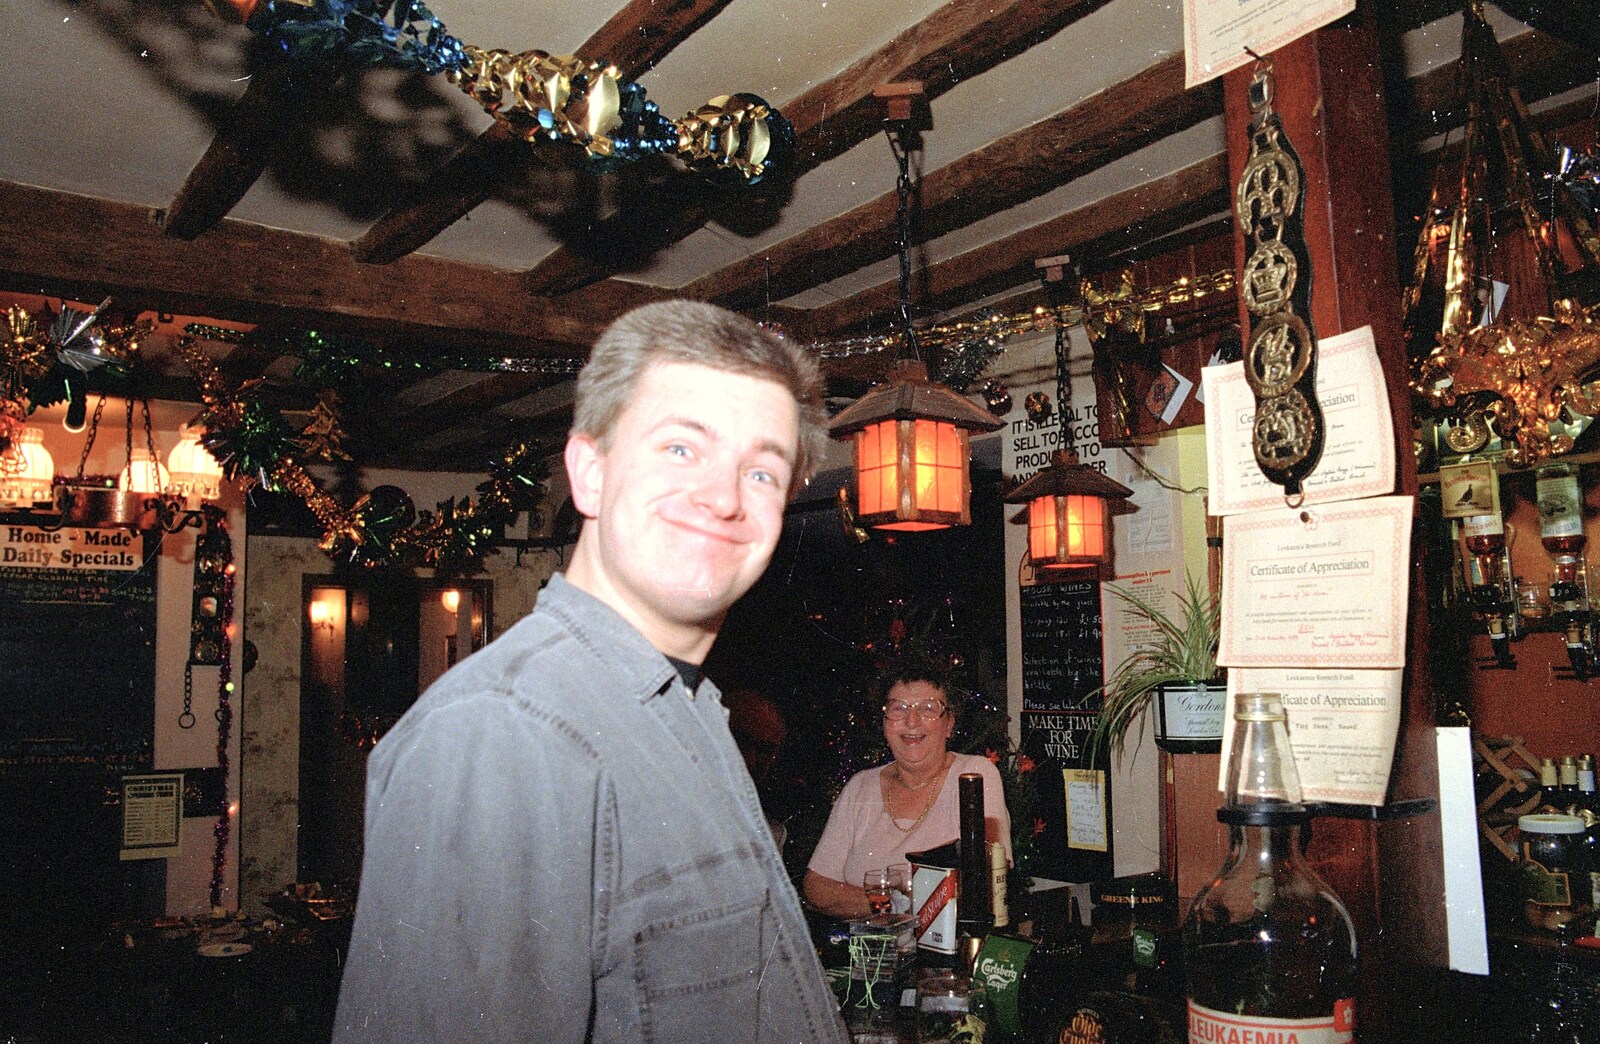 Nosher from New Year's Eve at the Swan Inn, Brome, Suffolk - 31st December 1994